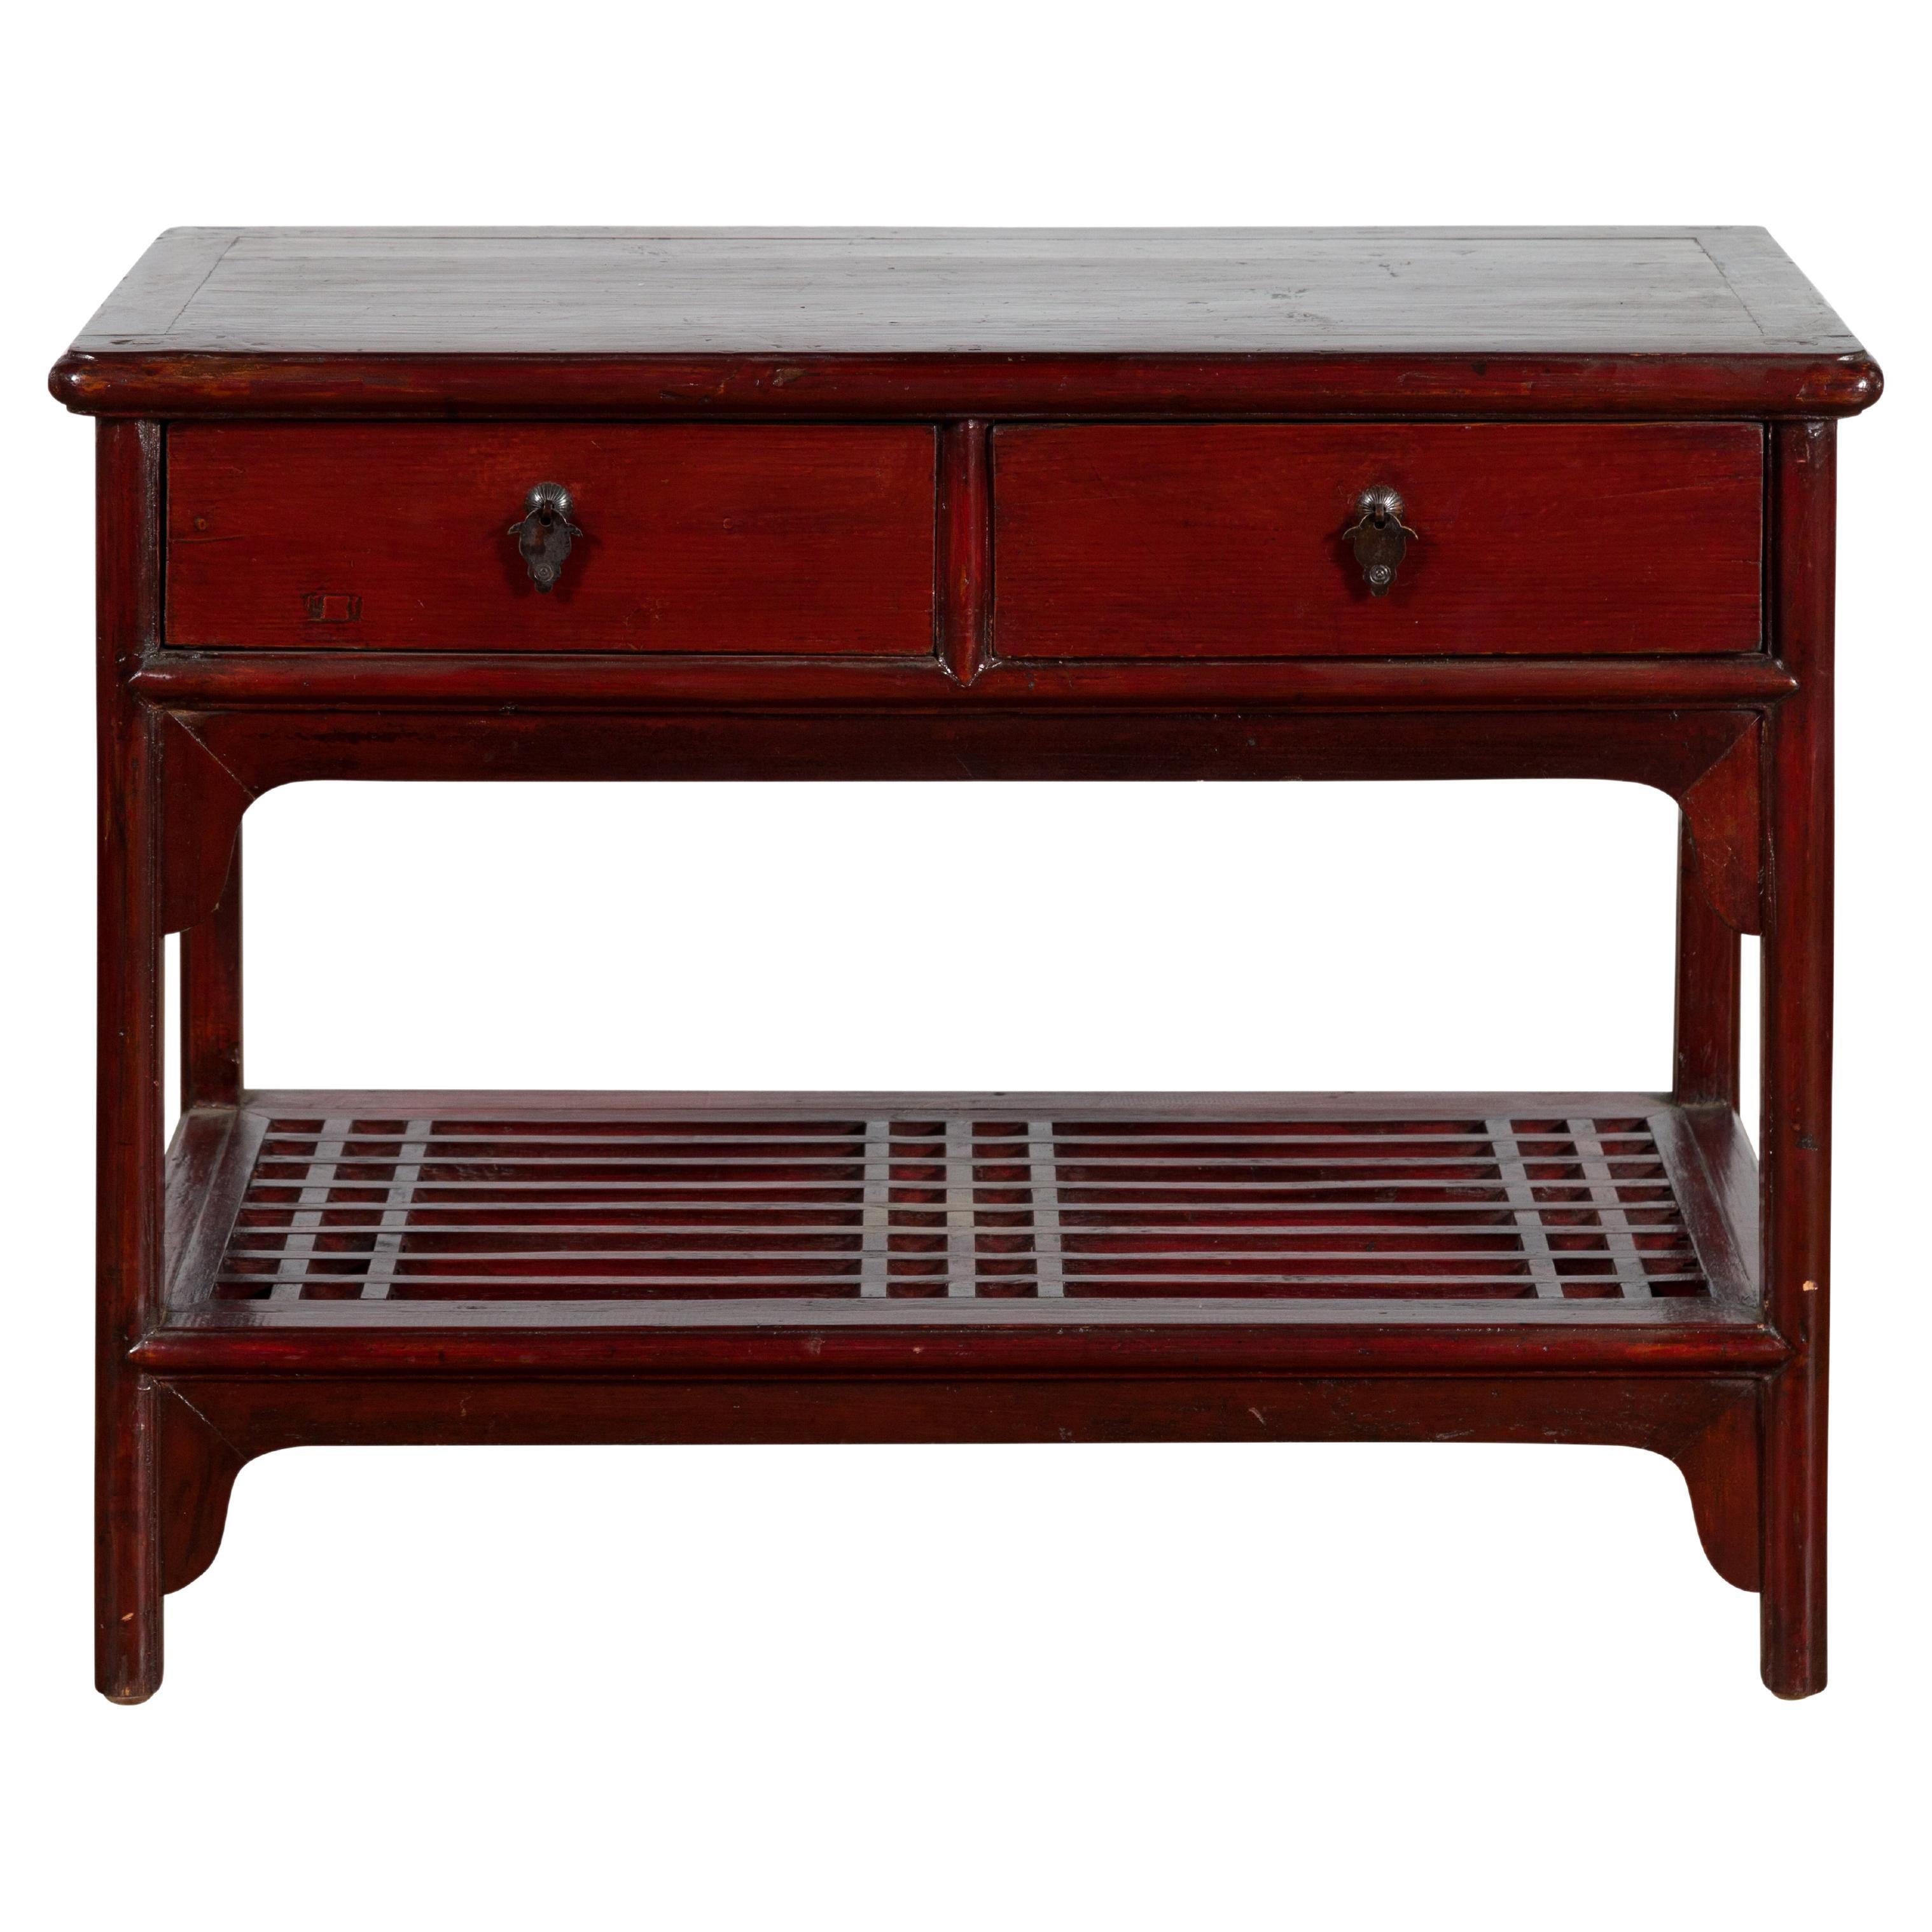 Chinese Vintage Oxblood Lacquer Side Table with Two Drawers and Fretwork Shelf